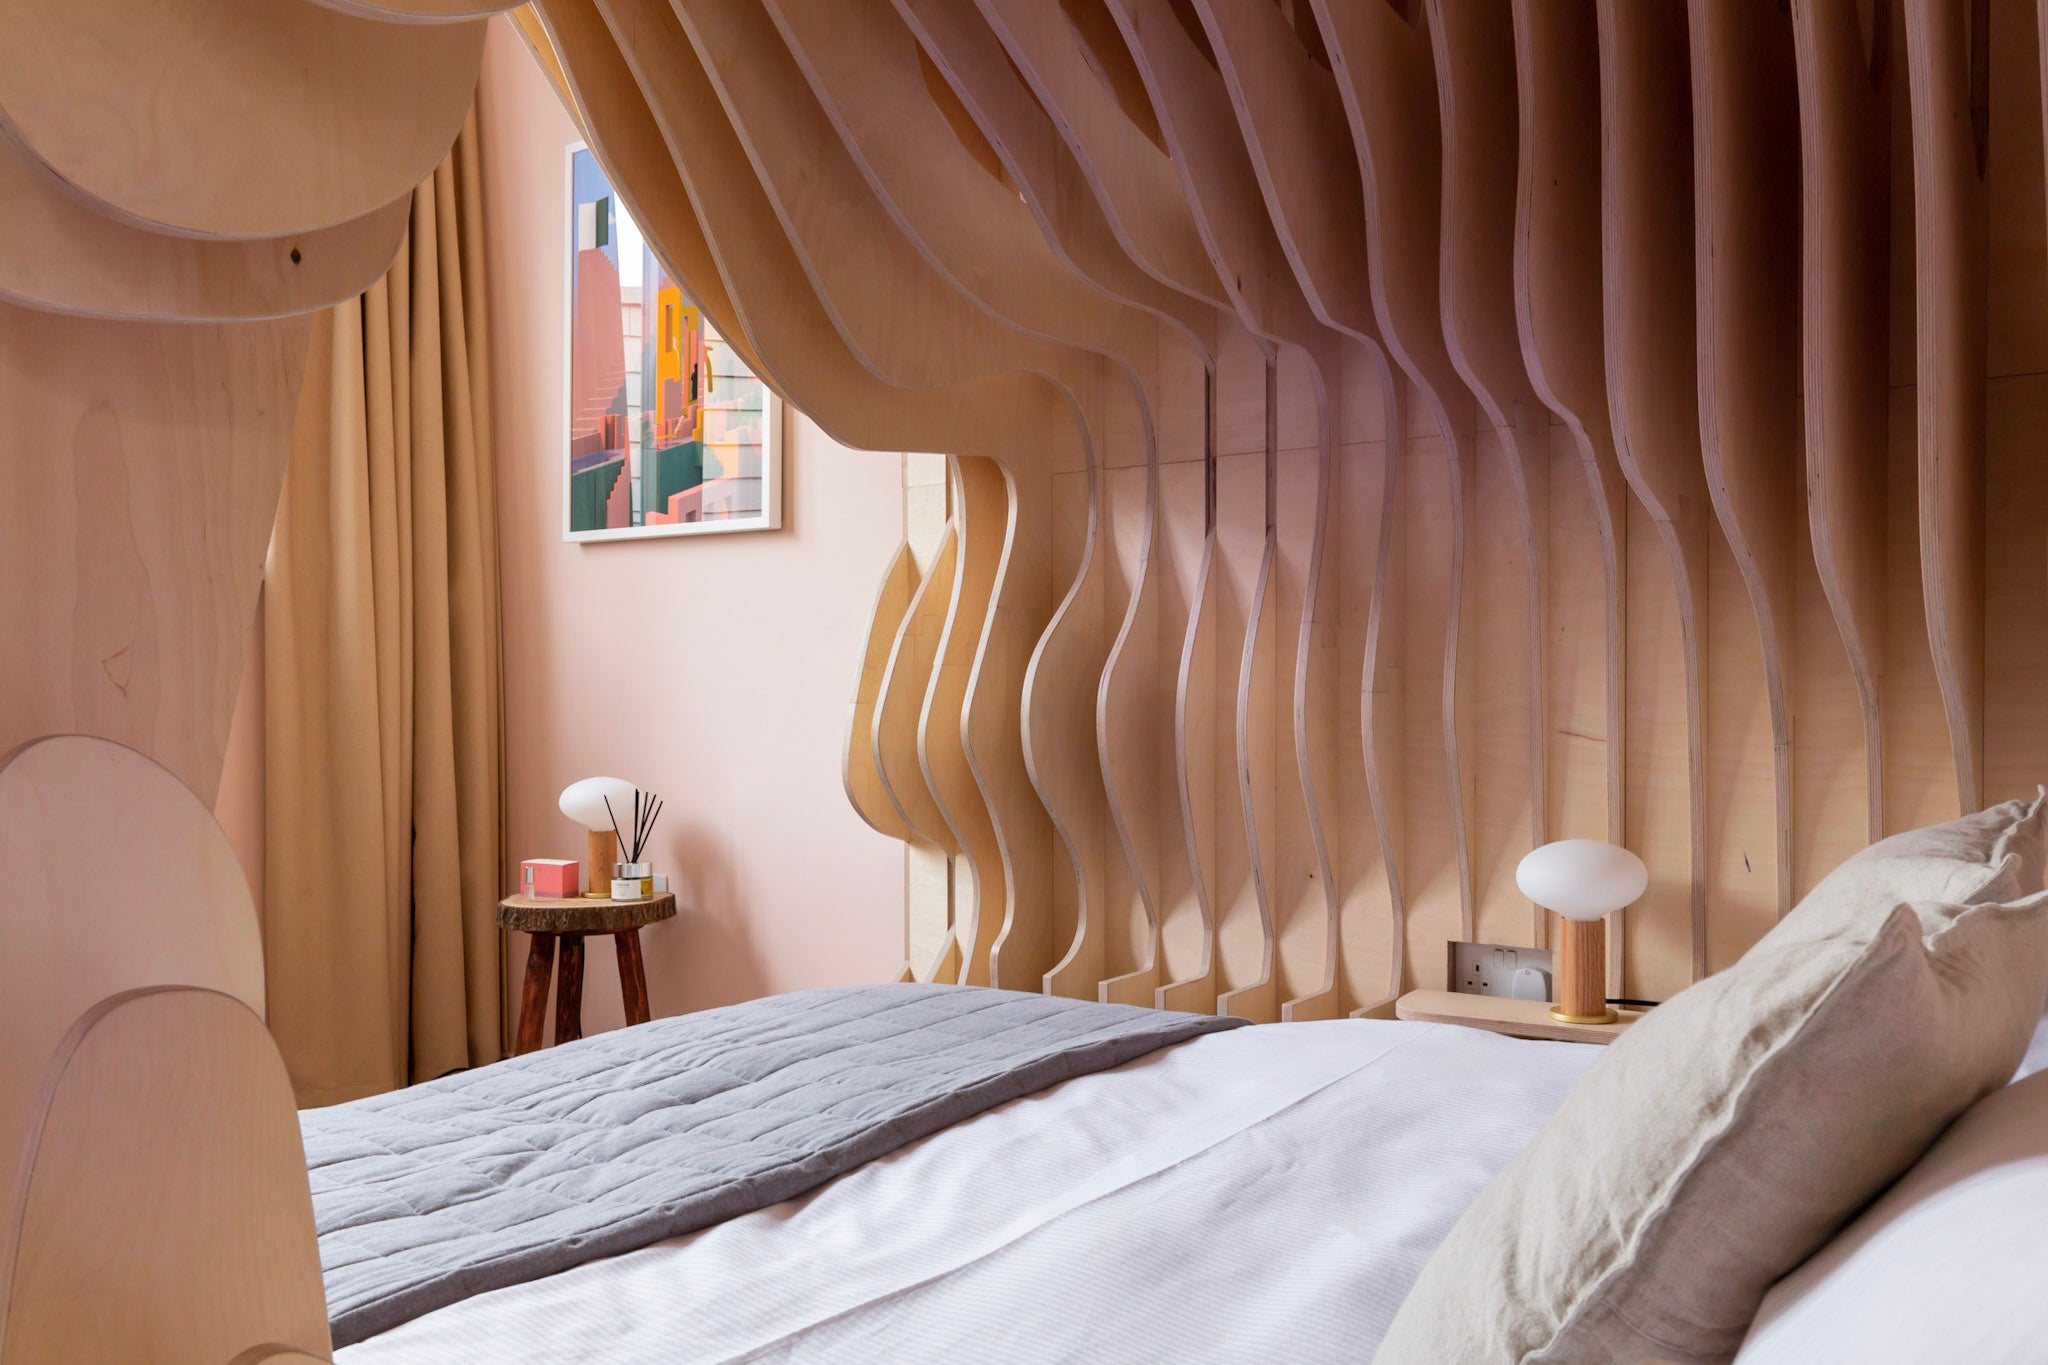 Womb-inspired bedroom designed to help guests 'sleep like a baby